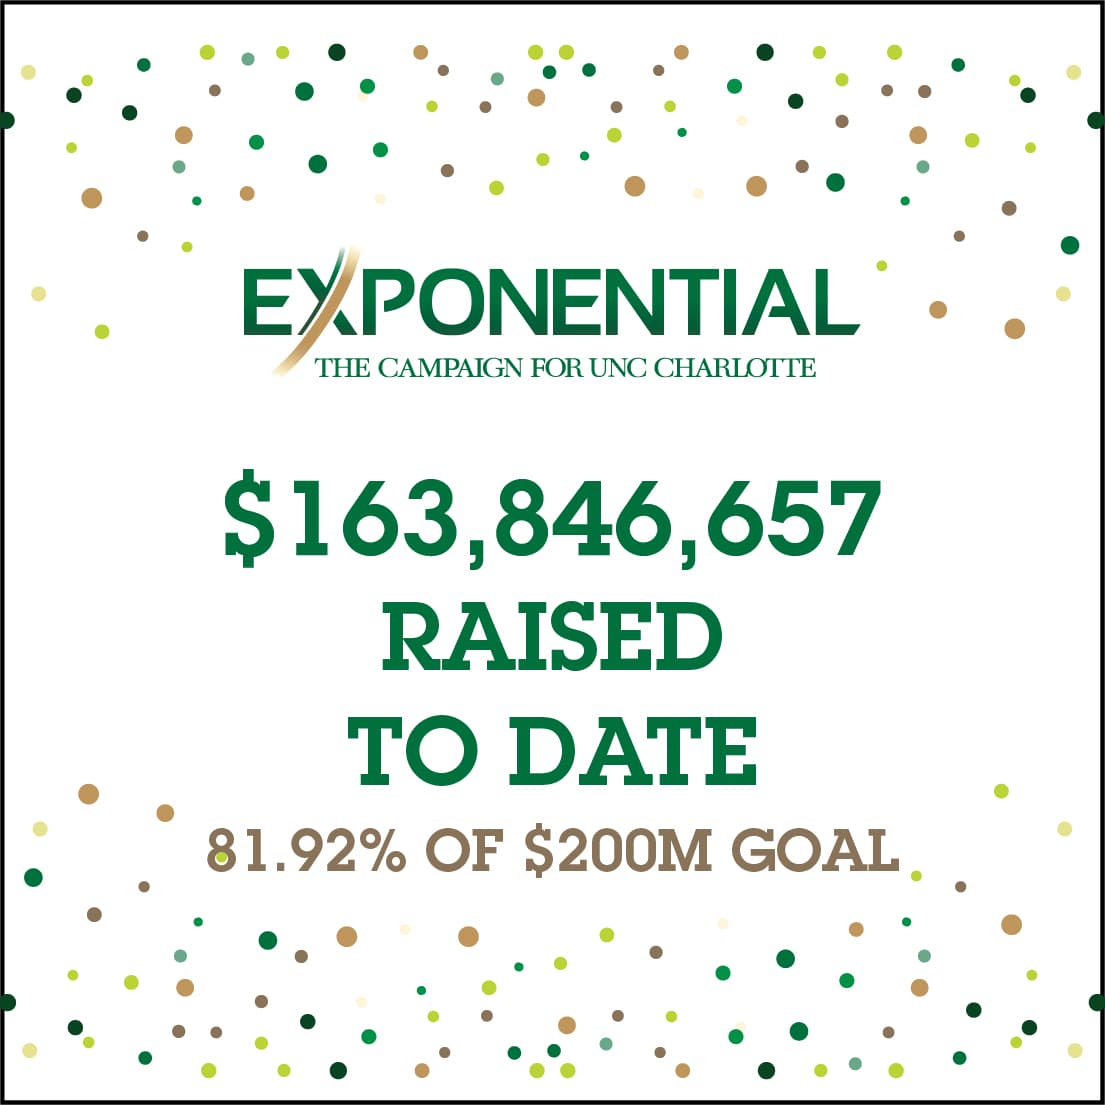 Exponential: $163,846,657 raised to date - 81.92% of $200M goal